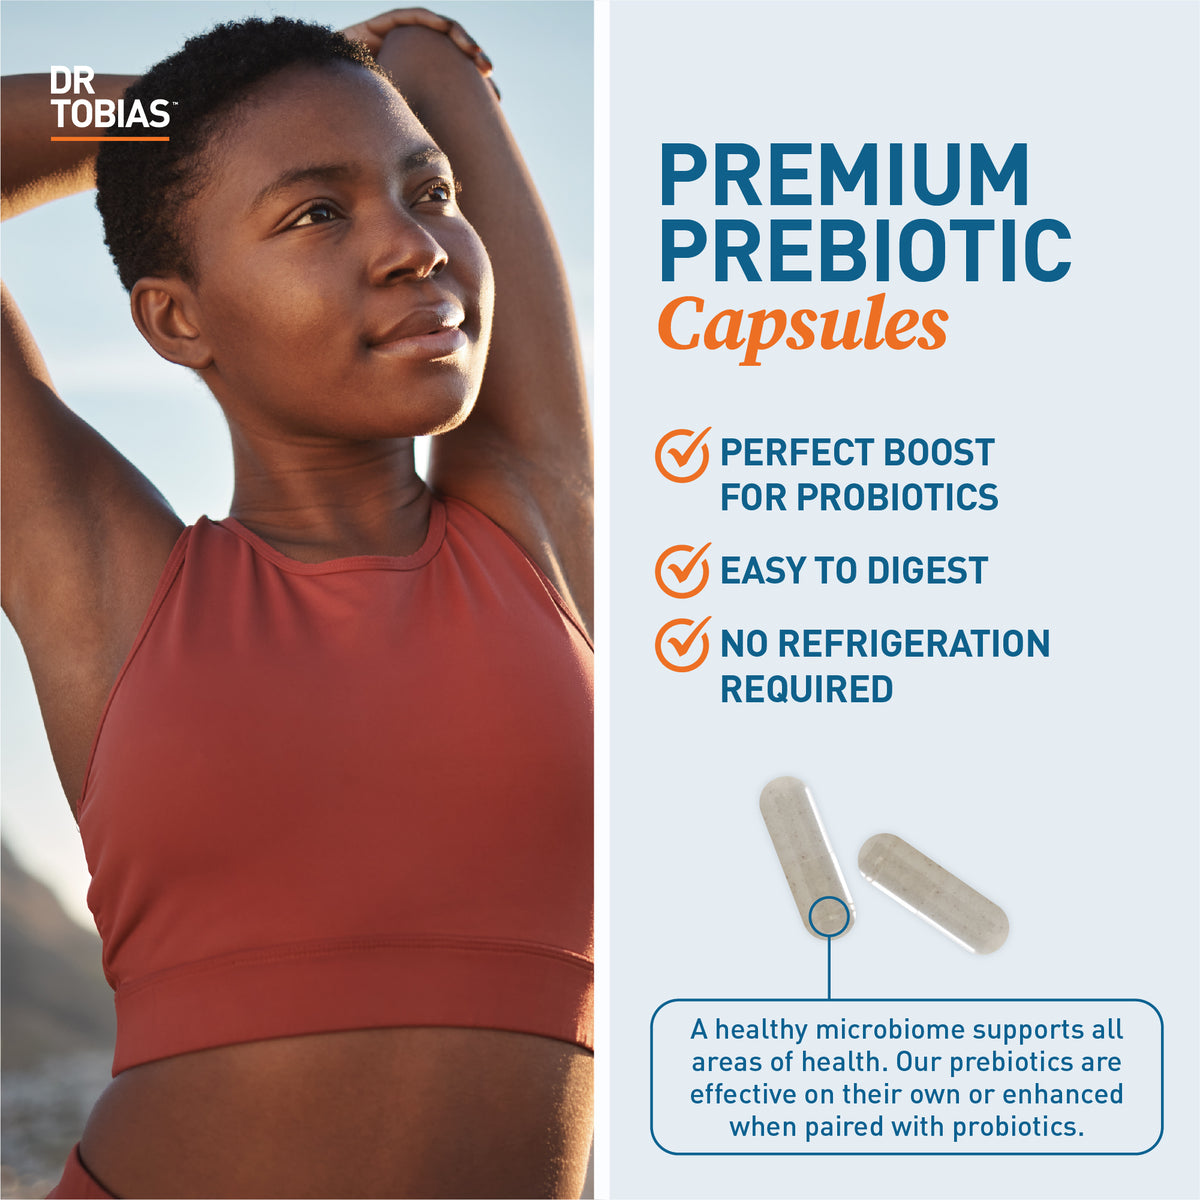 premium prebiotic capsules are perfect to boost probiotics, easy to digest and no refrigeration required